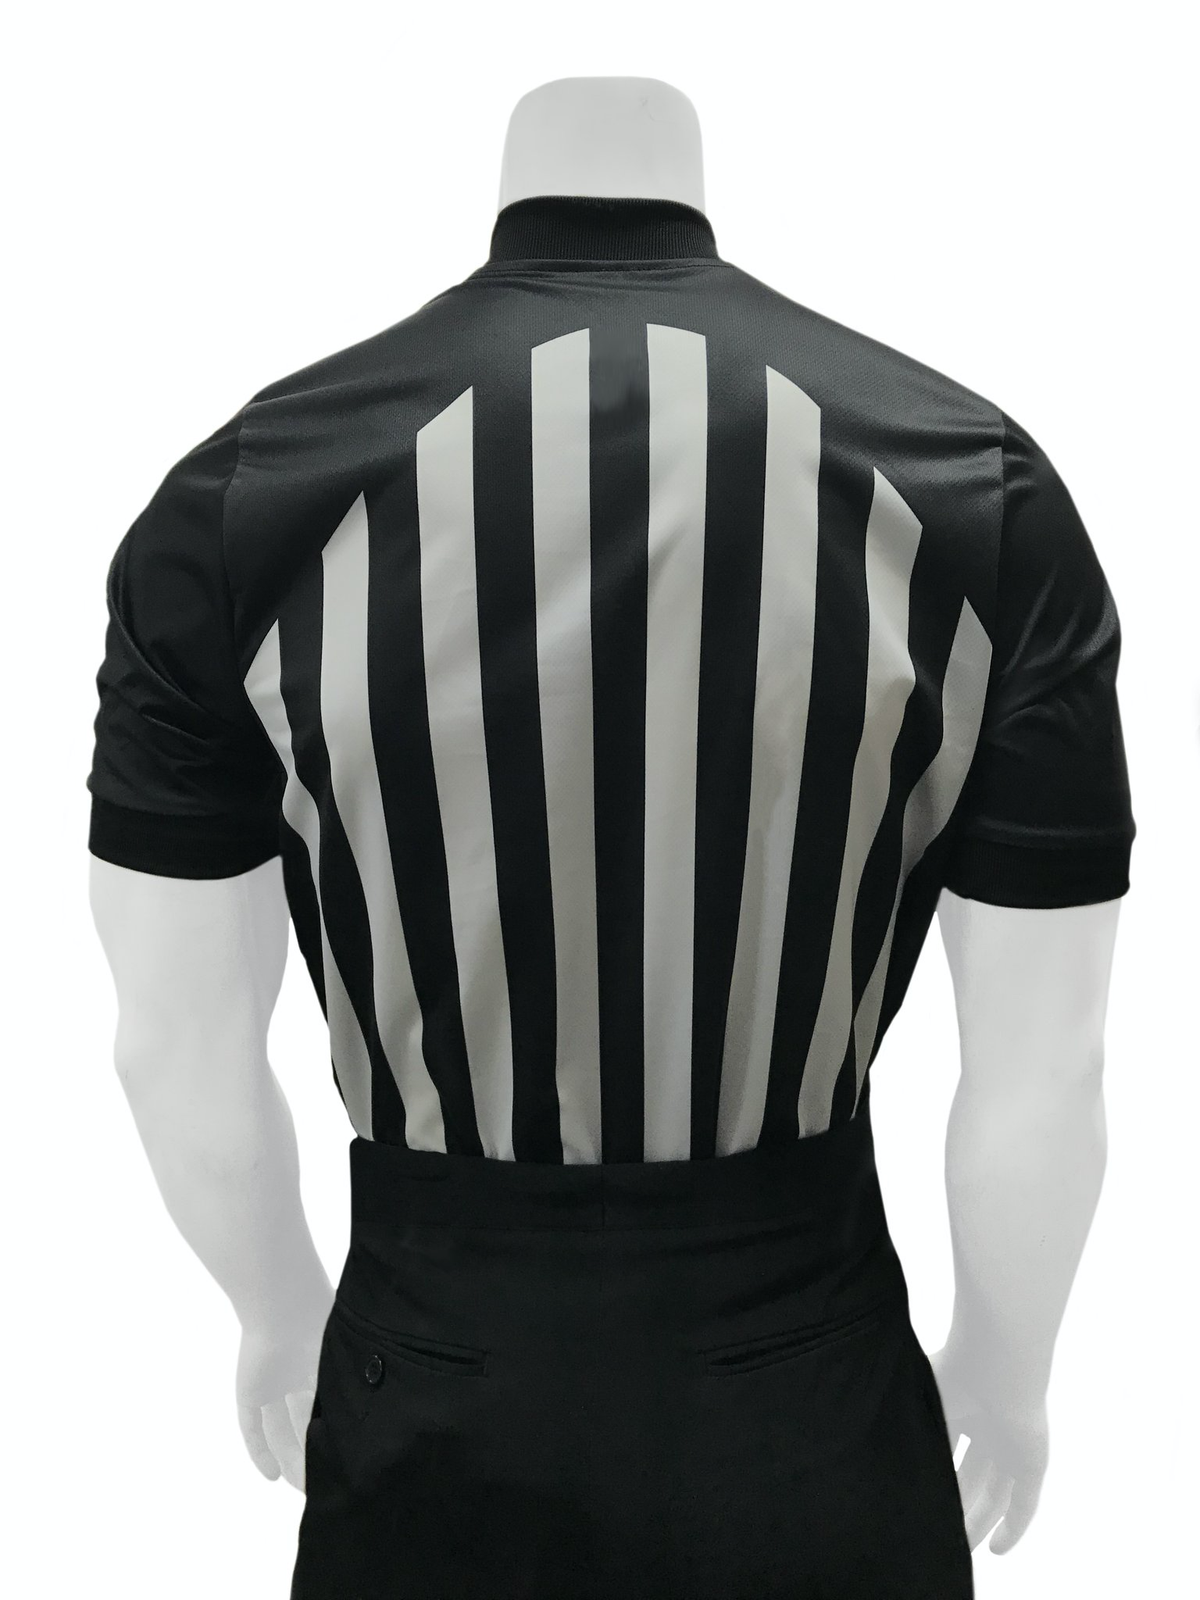 Smitty | USA-216 | NCAA Approved Men's Basketball Collegiate Referee Shirt | Made in USA - Great Call Athletics